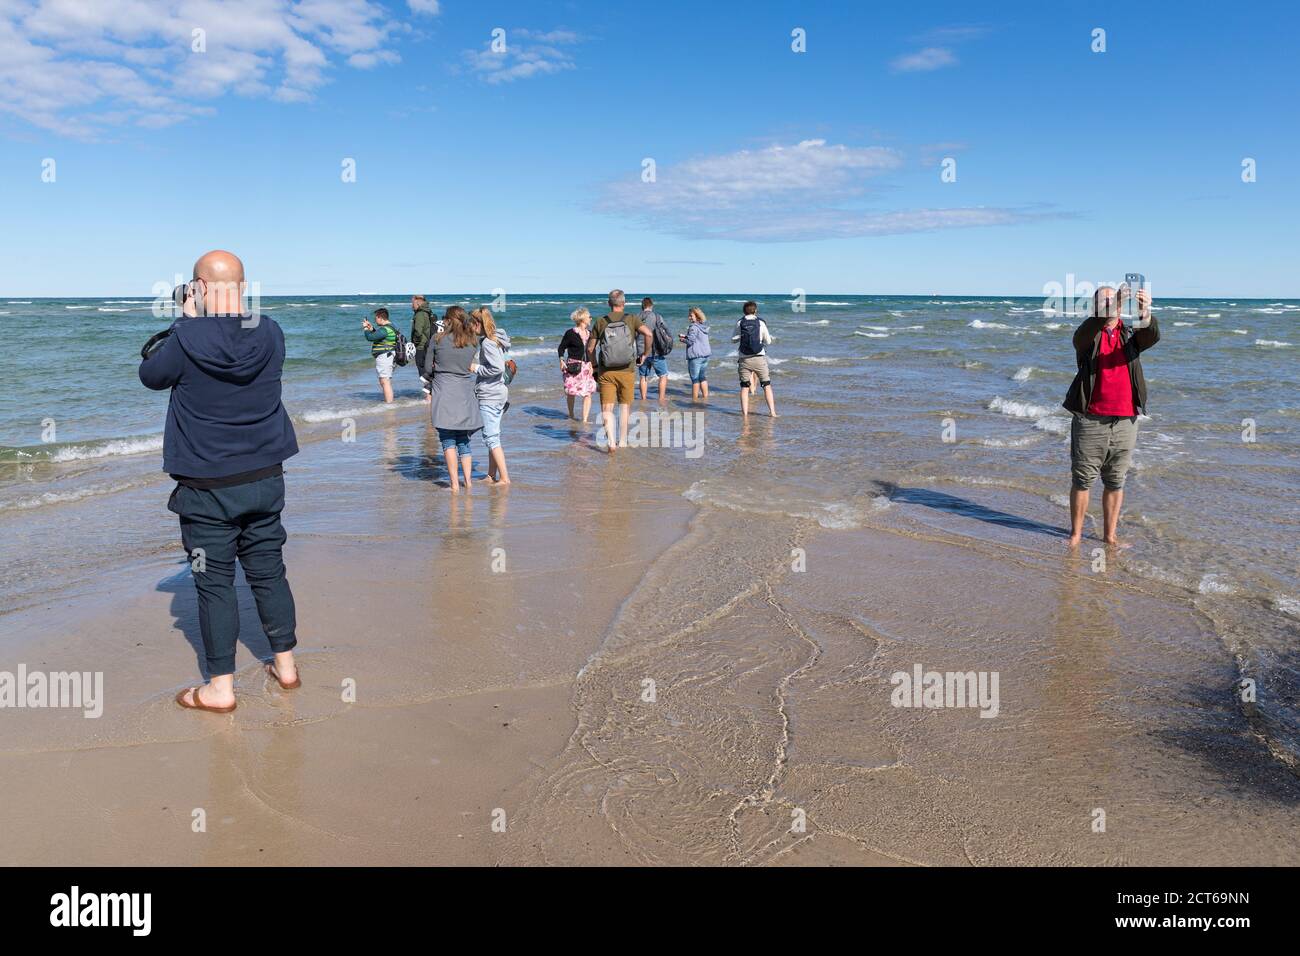 Skagen, Denmark - August 31, 2020: At Grenen, the northernmost point of Denmark, where Baltic Sea and North Sea waves meet, tourists are taking photos Stock Photo